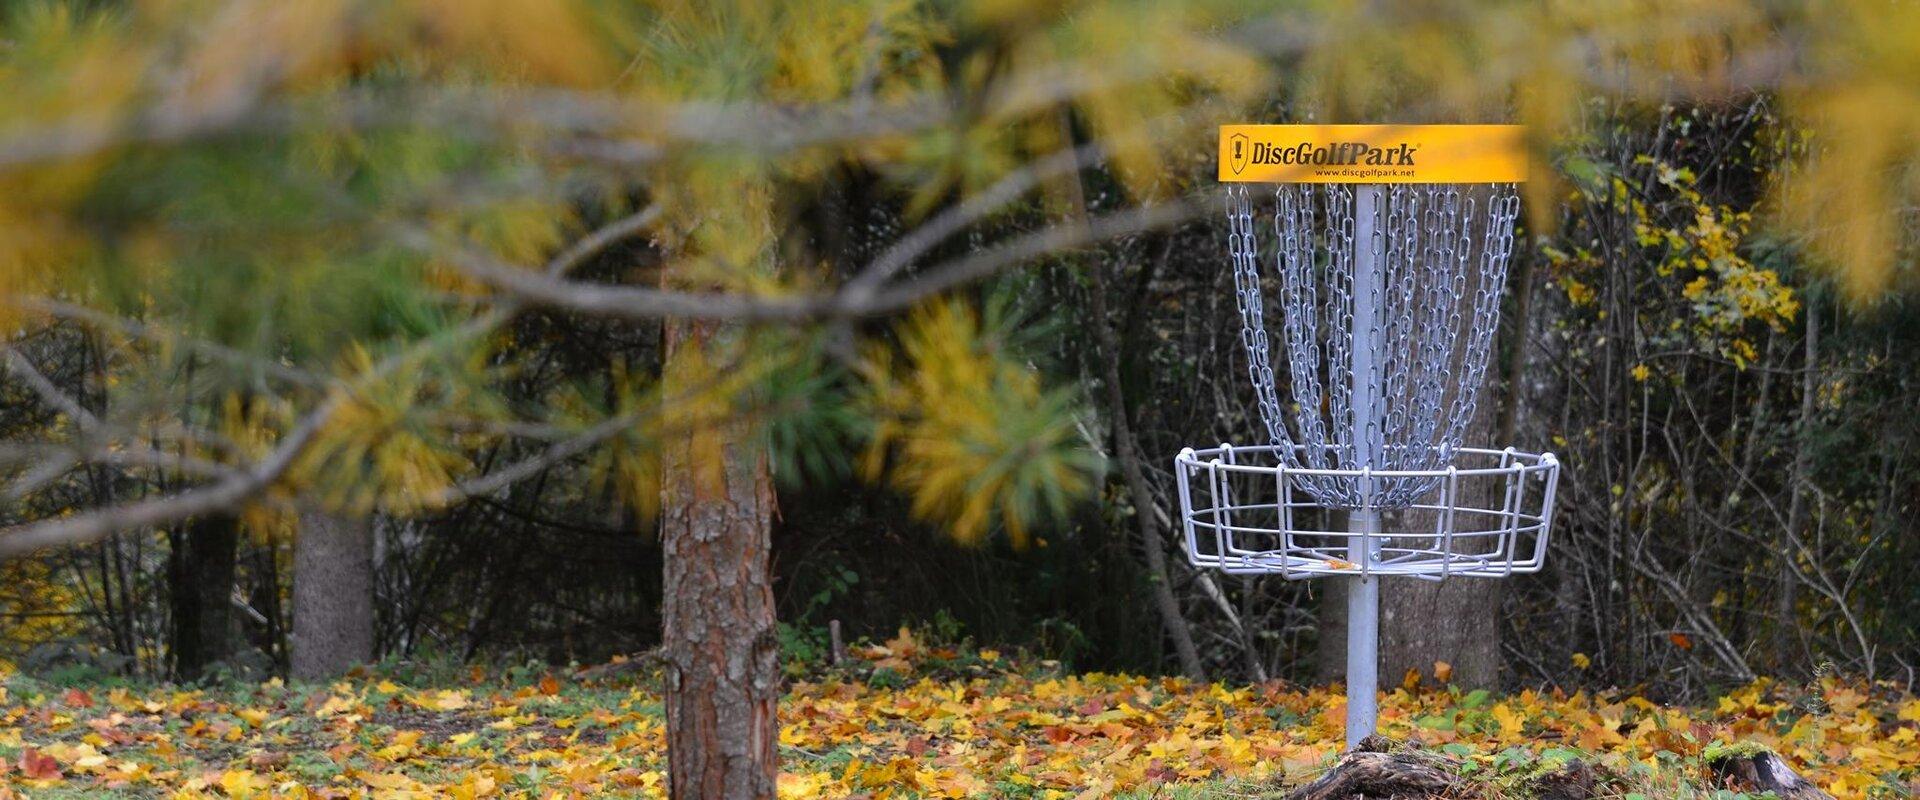 Annikoru Disc Golf Park in autumn, yellow basket and yellow leaves on the grass